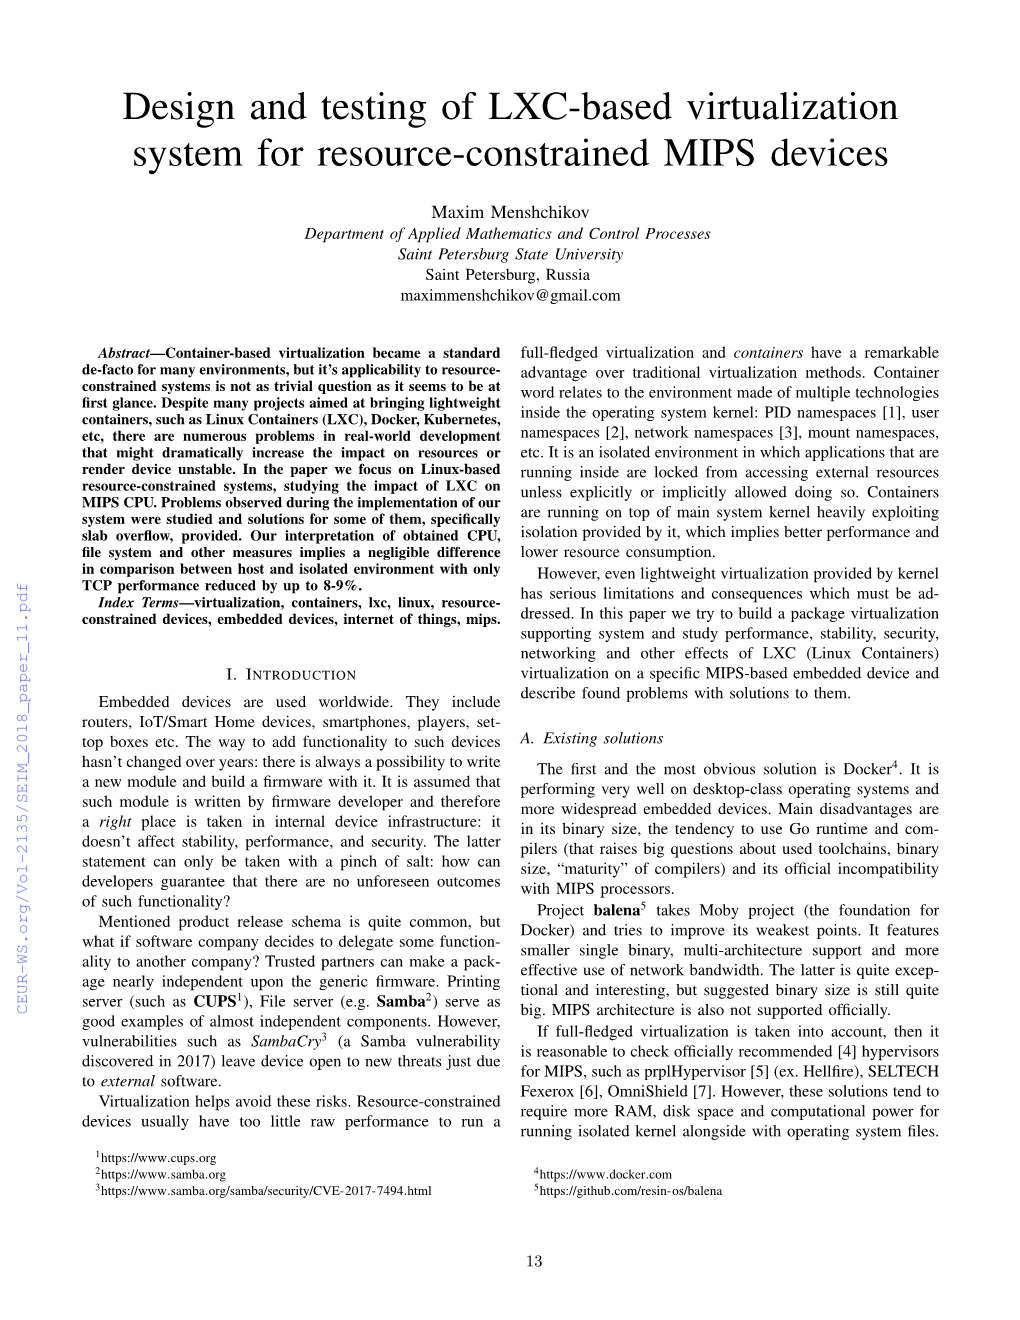 Design and Testing of LXC-Based Virtualization System for Resource-Constrained MIPS Devices